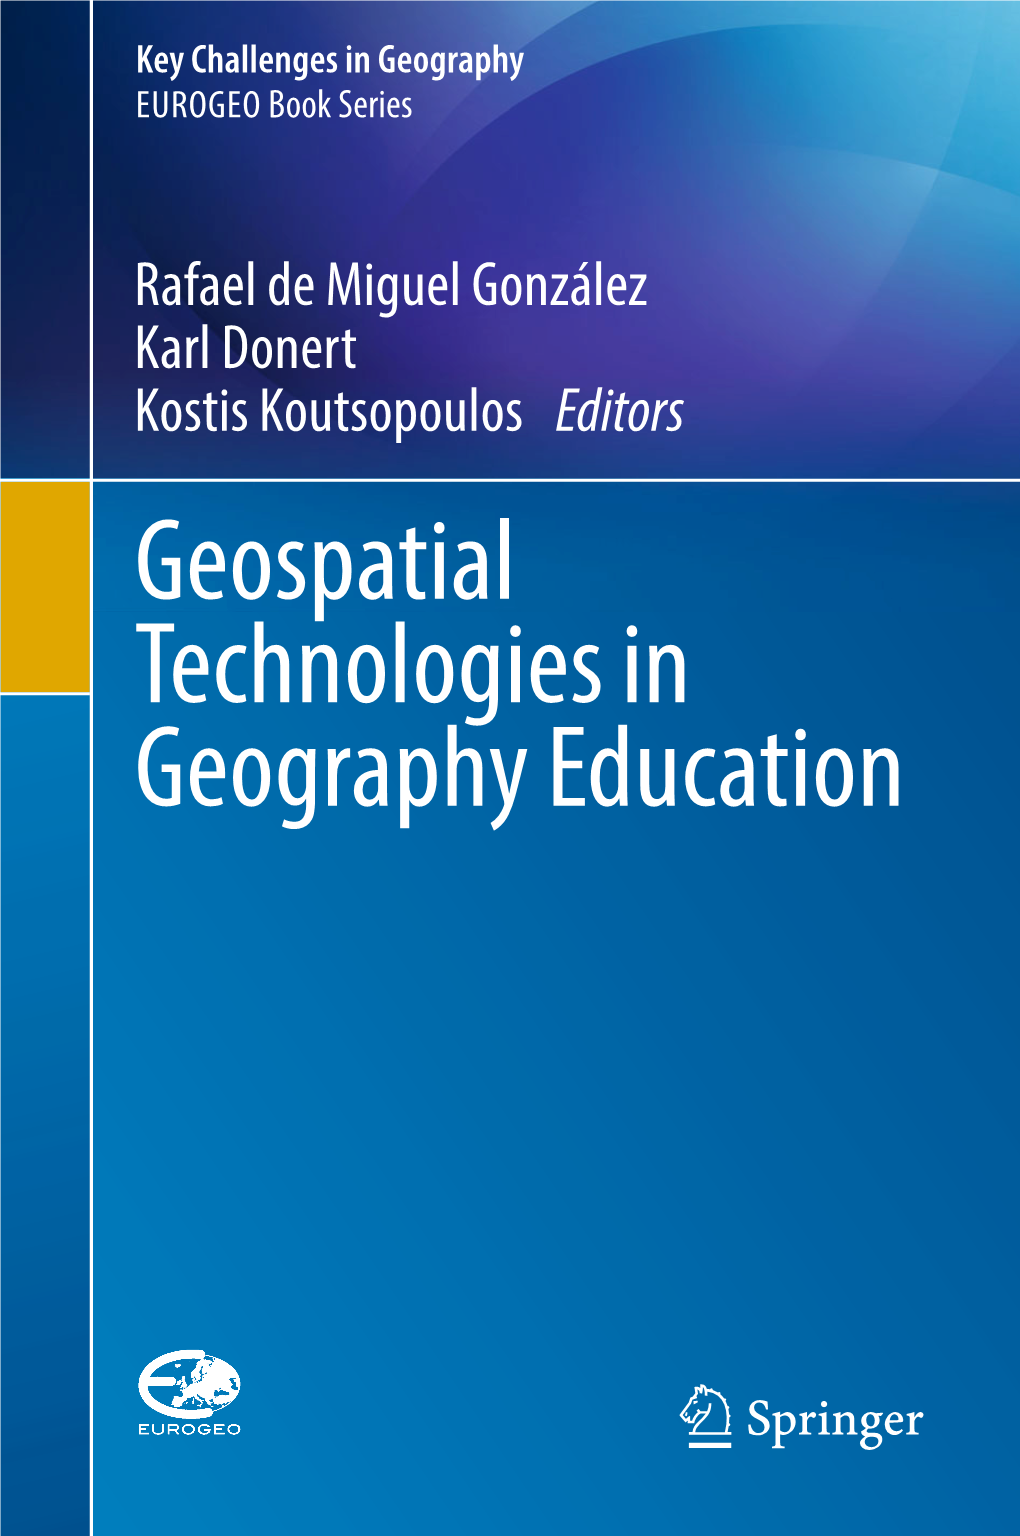 Geospatial Technologies in Geography Education Key Challenges in Geography